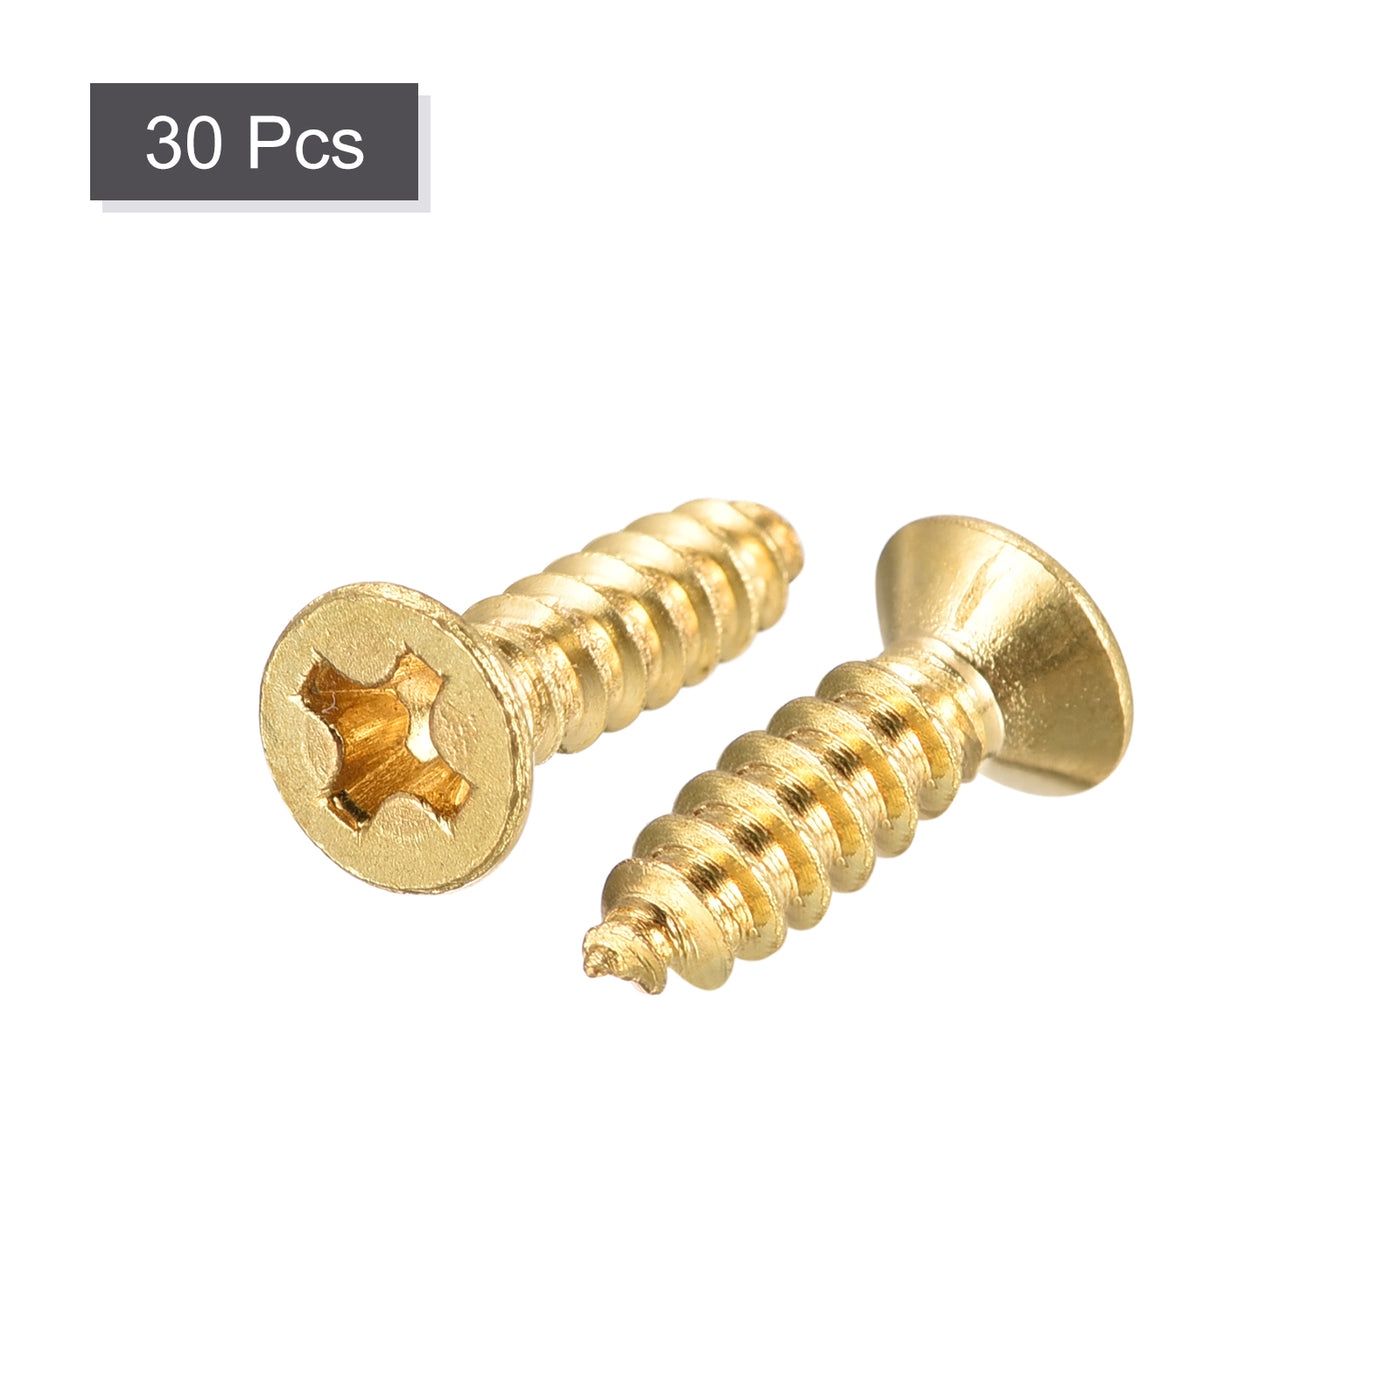 Uxcell Uxcell Brass Wood Screws, M3x10mm Phillips Flat Head Self Tapping Connector for Door, Cabinet, Wooden Furniture 30Pcs